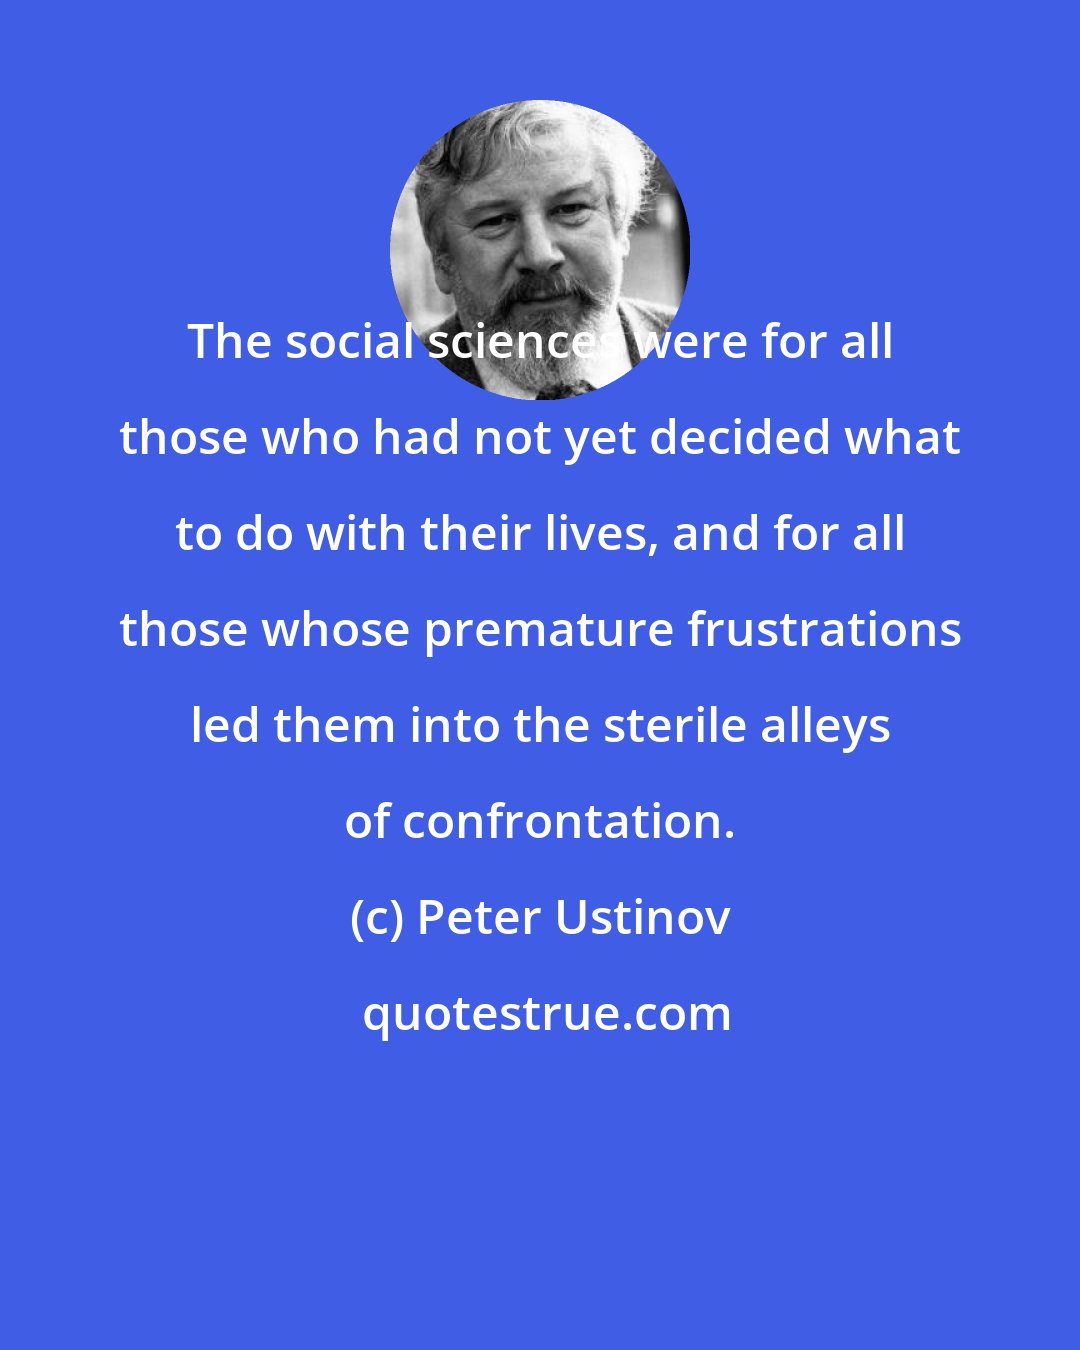 Peter Ustinov: The social sciences were for all those who had not yet decided what to do with their lives, and for all those whose premature frustrations led them into the sterile alleys of confrontation.